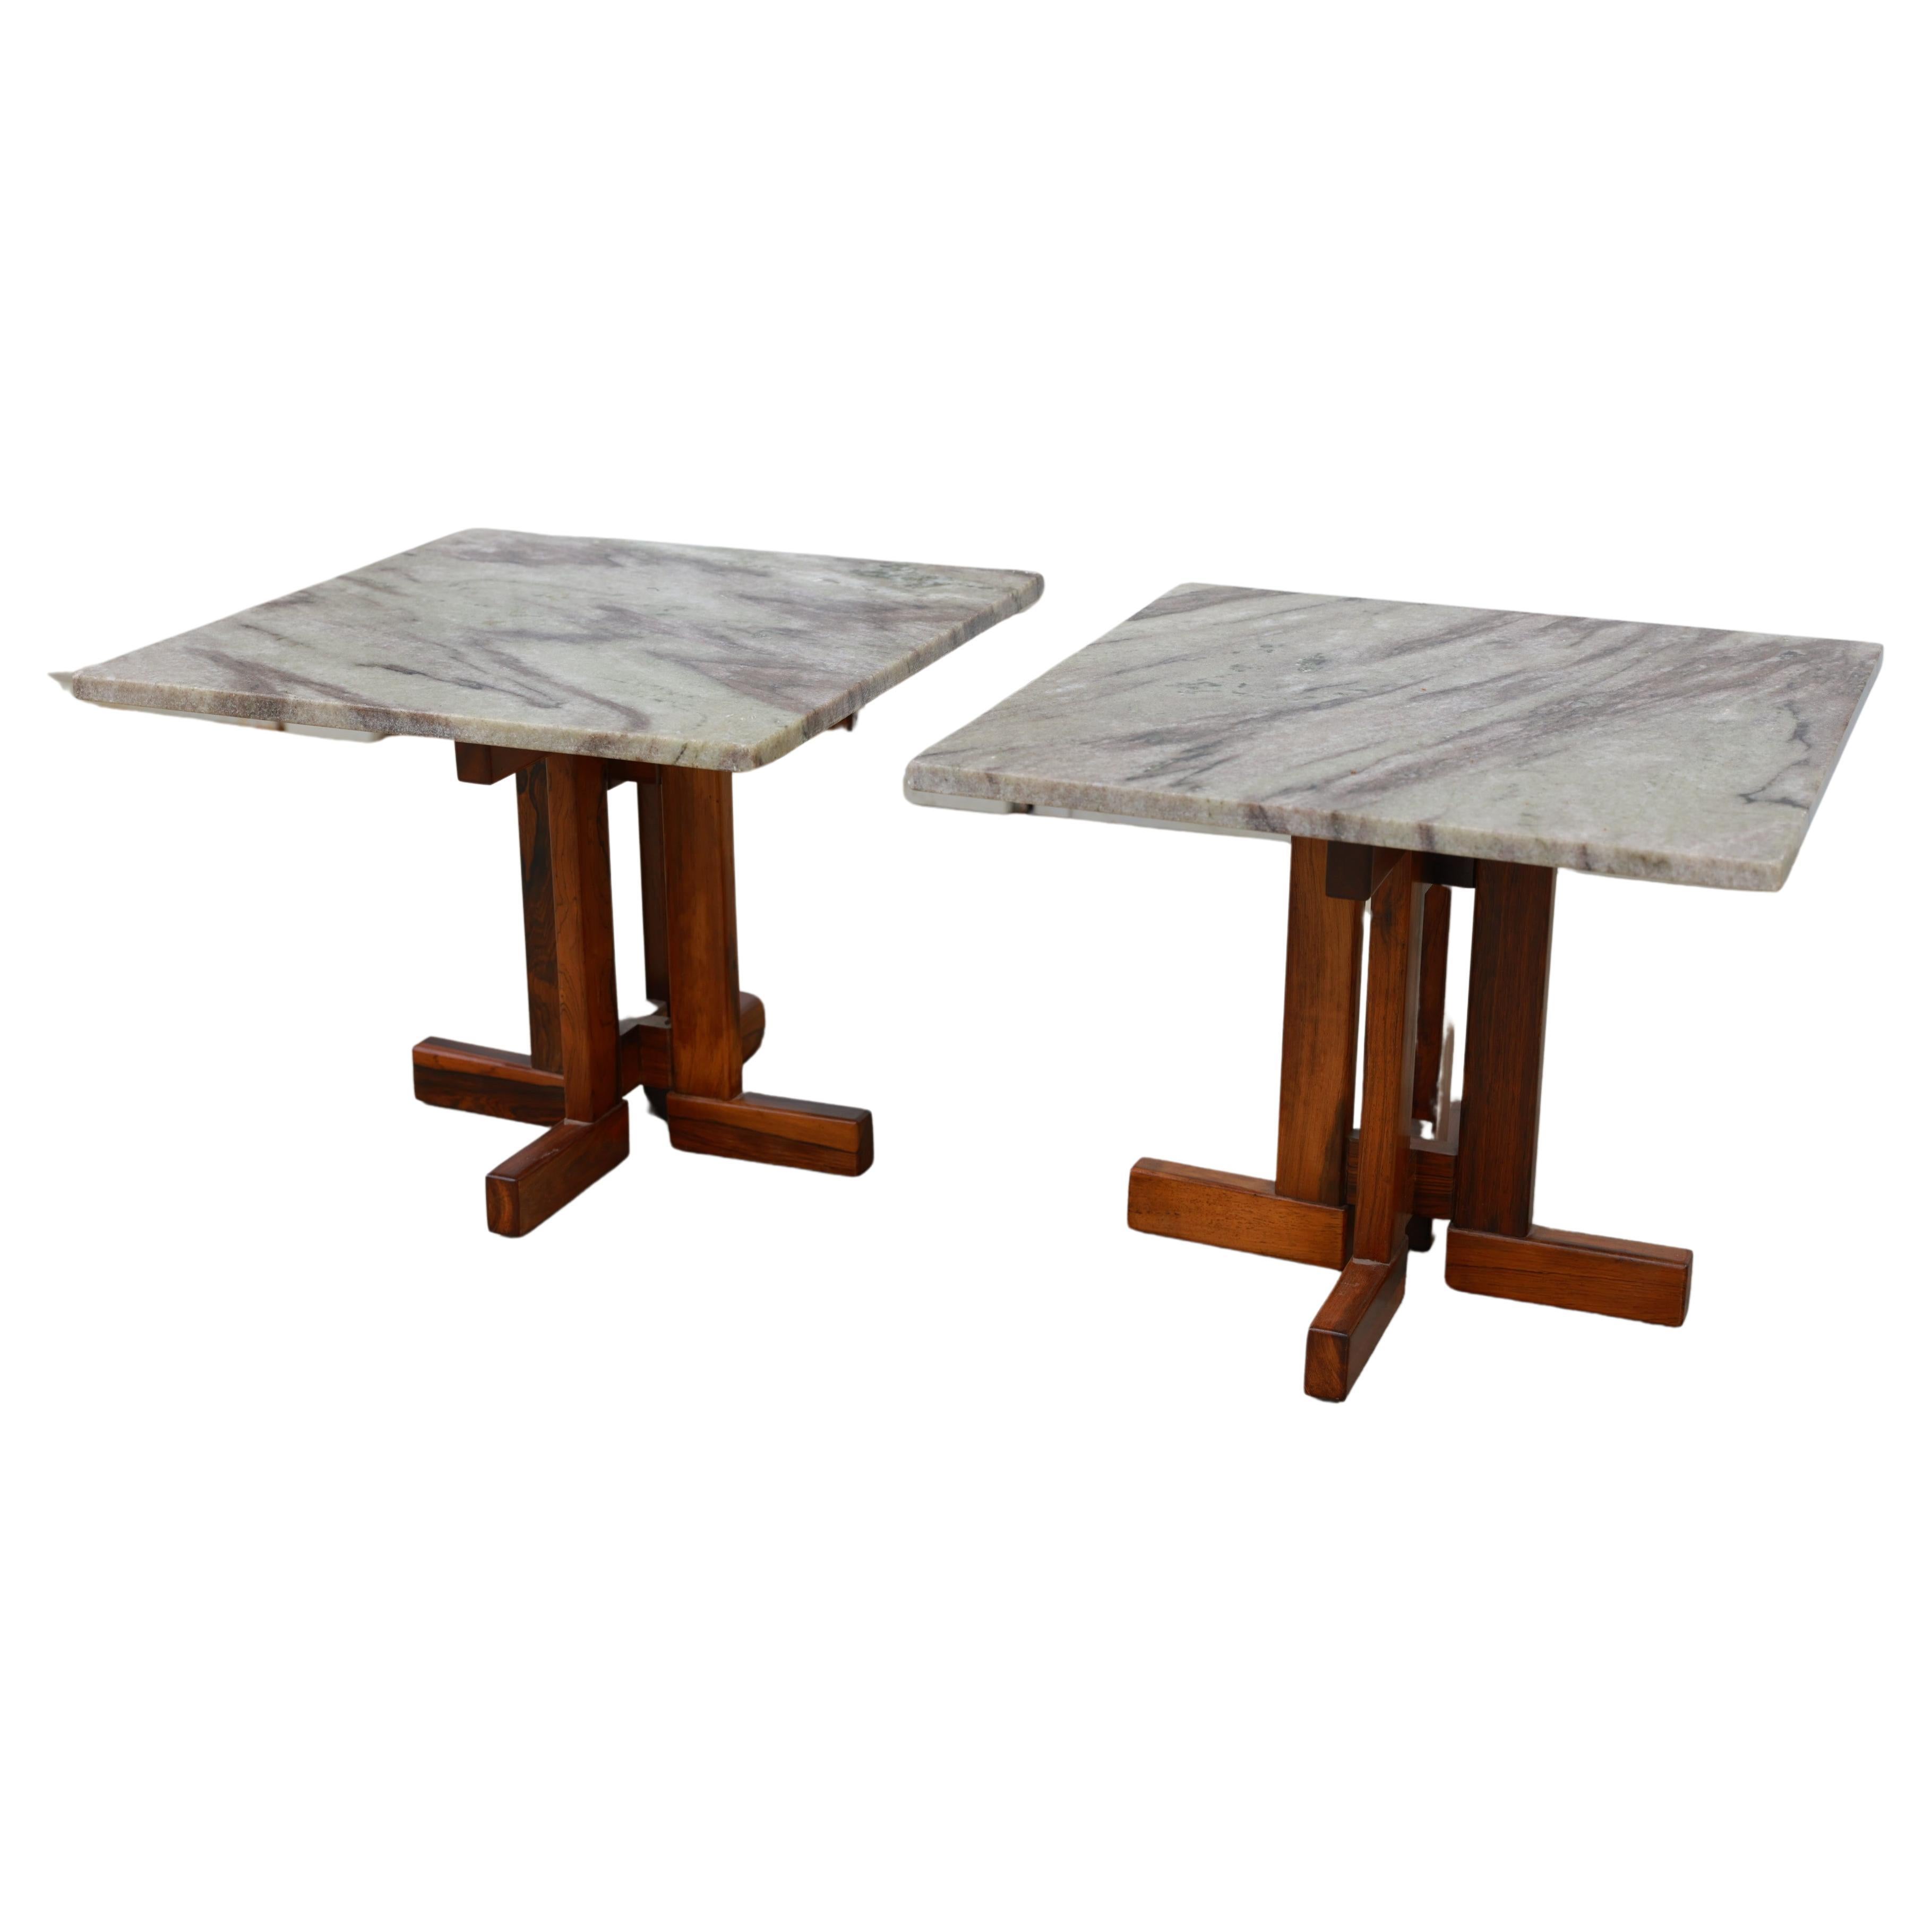 Brazilian Modern Pair of Side Tables in Rosewood and Granite by Celina, c. 1960